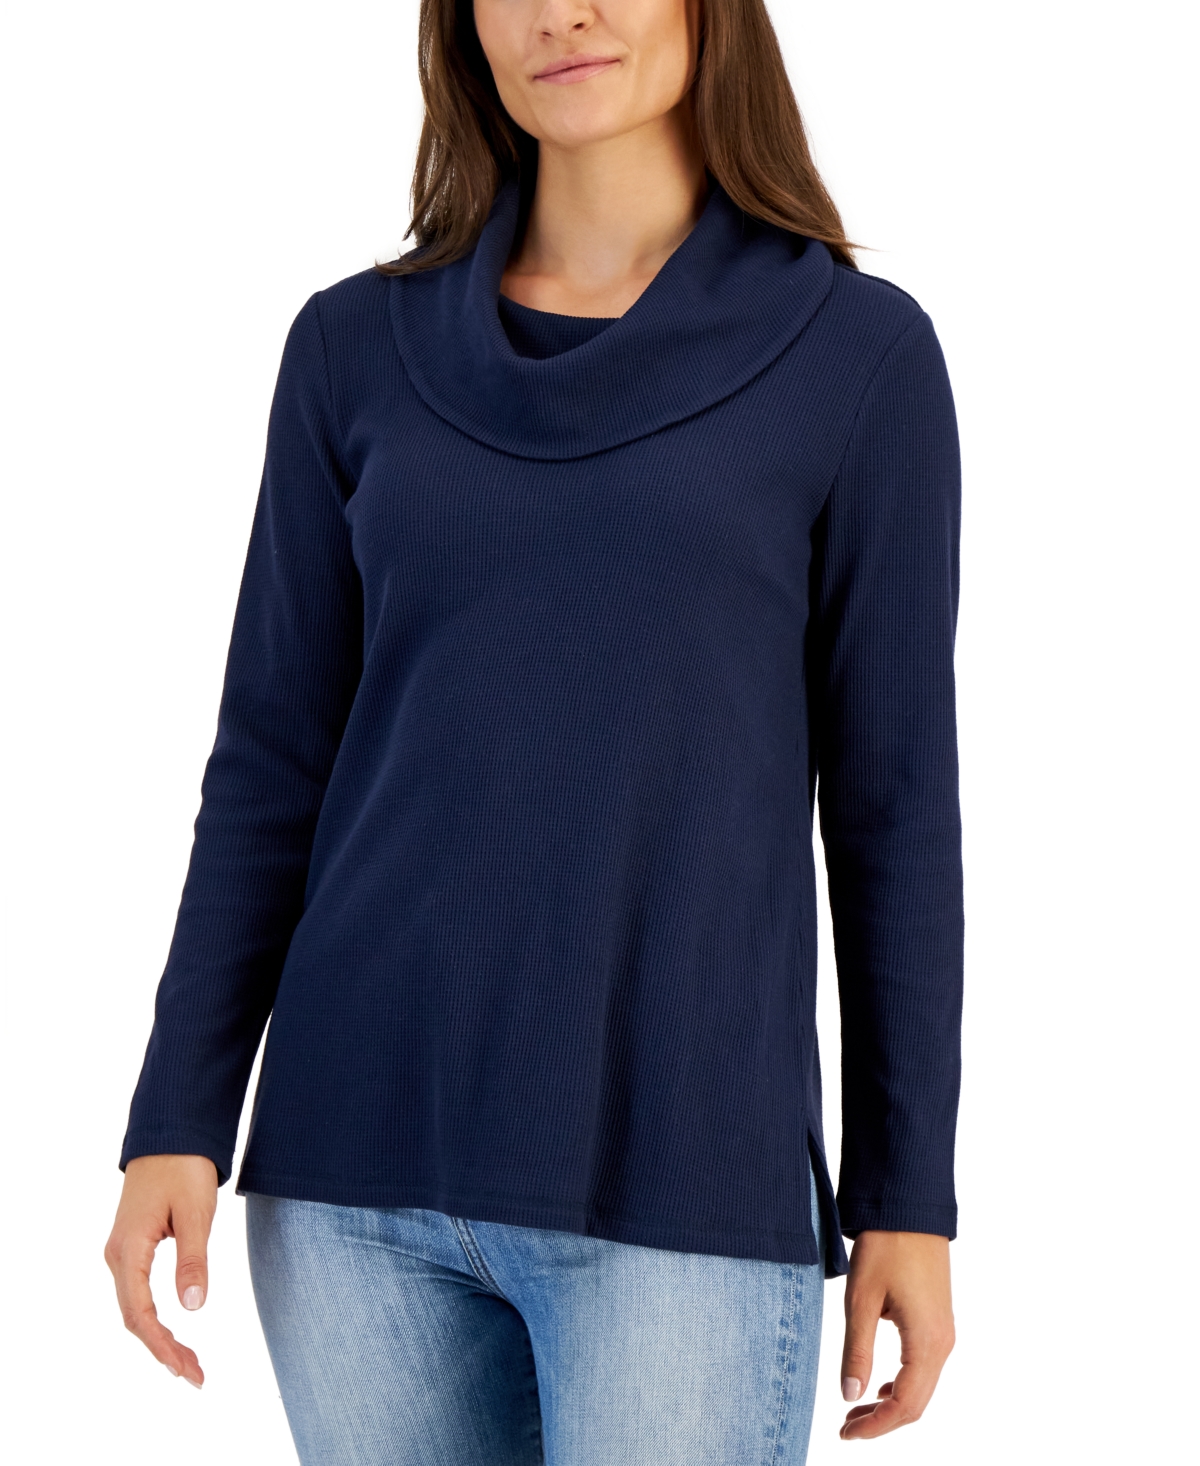 Women's Mini Waffle Cowlneck top, Created for Macy's - Intrepid Blue